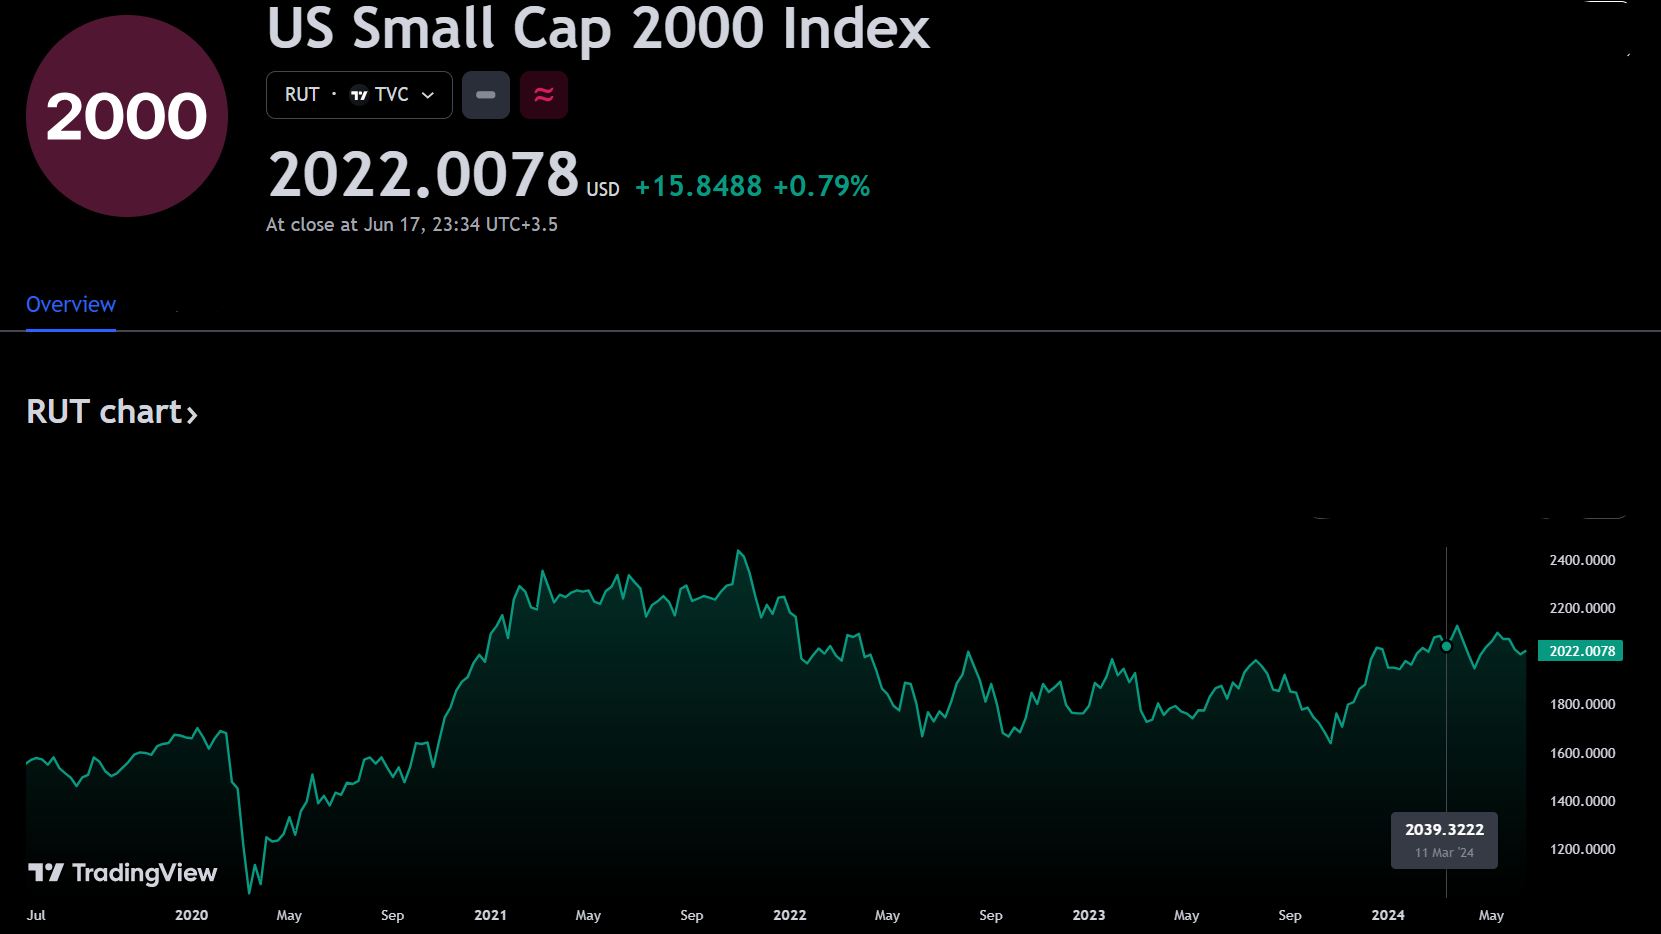 Russell 2000 index